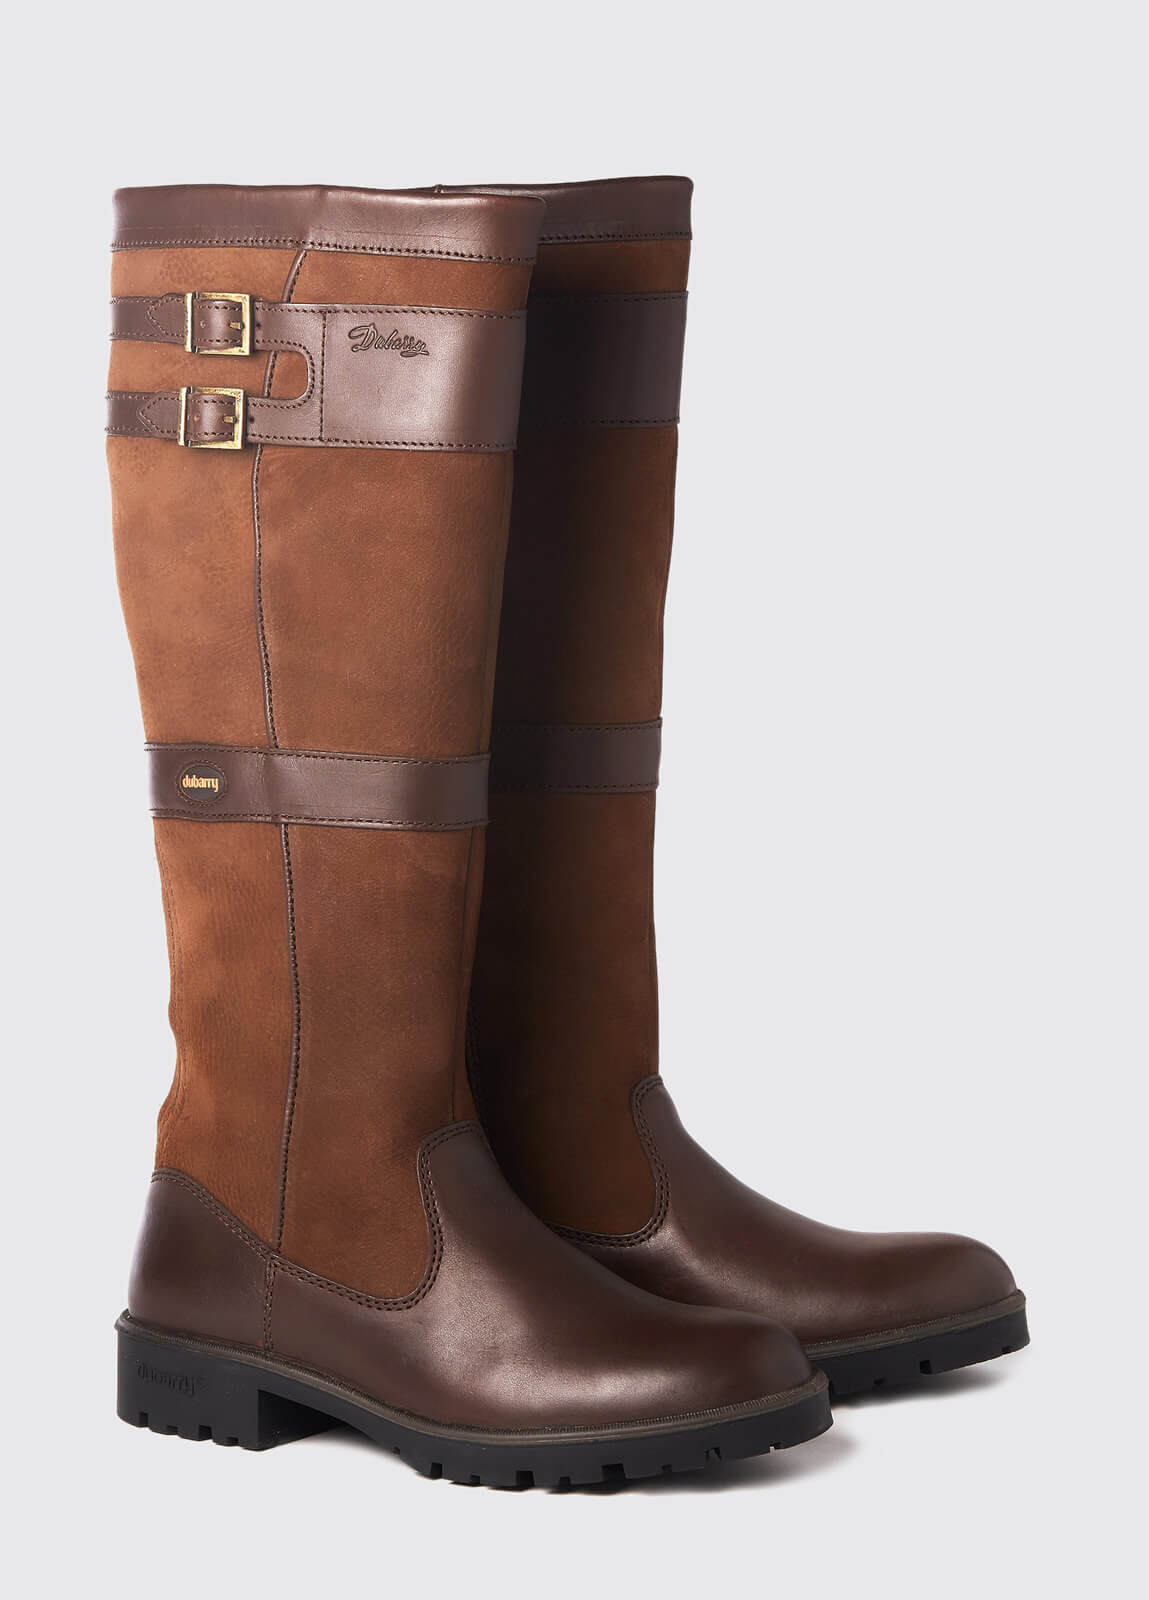 Dubarry Ladies Longford Country Boot in Walnut